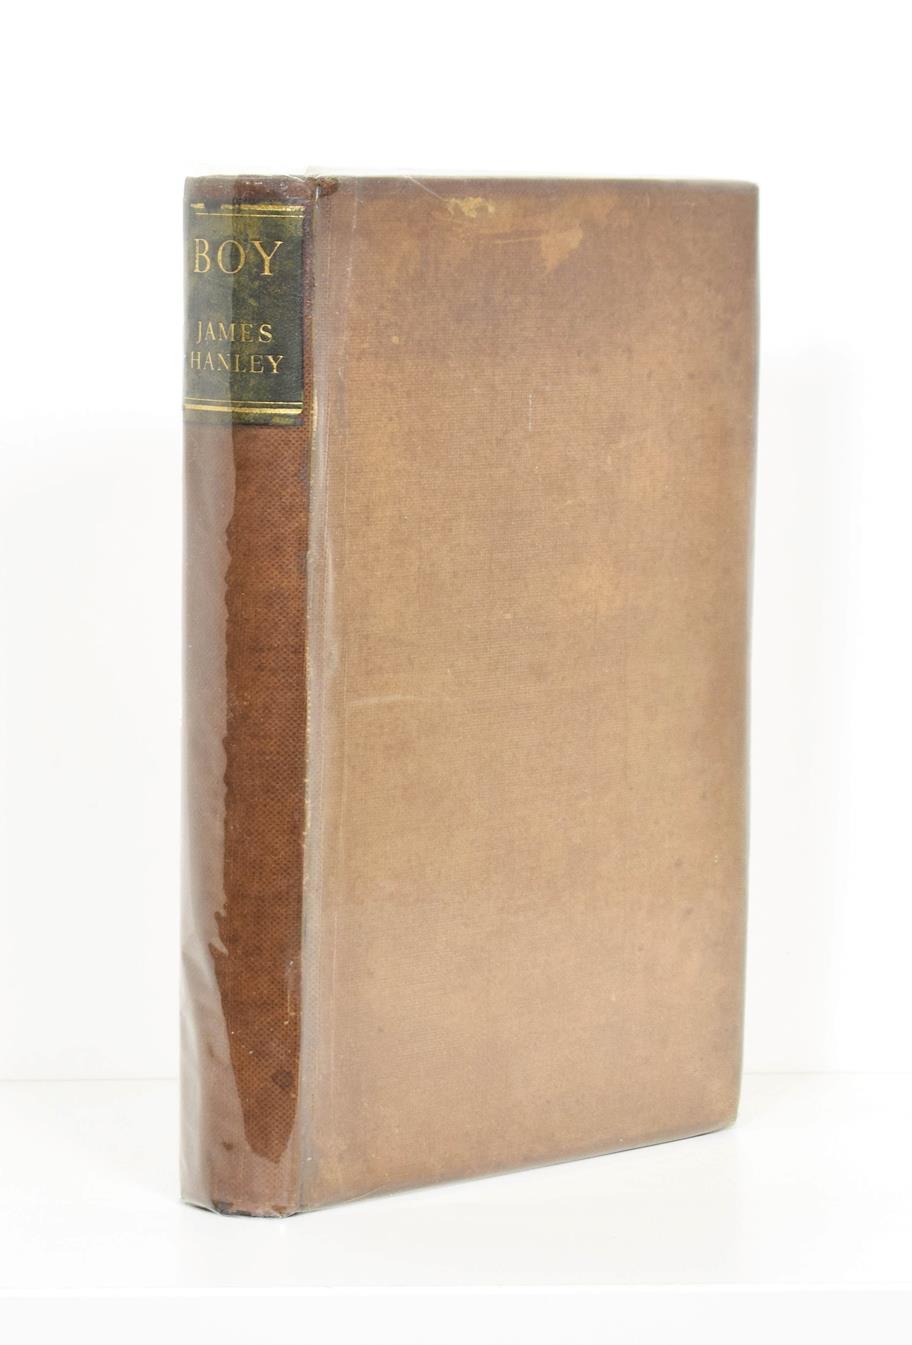 Lot 53 - Hanley (James) Boy, Boriswood, 1931, numbered limited edition of 145 (+15) , signed by the...